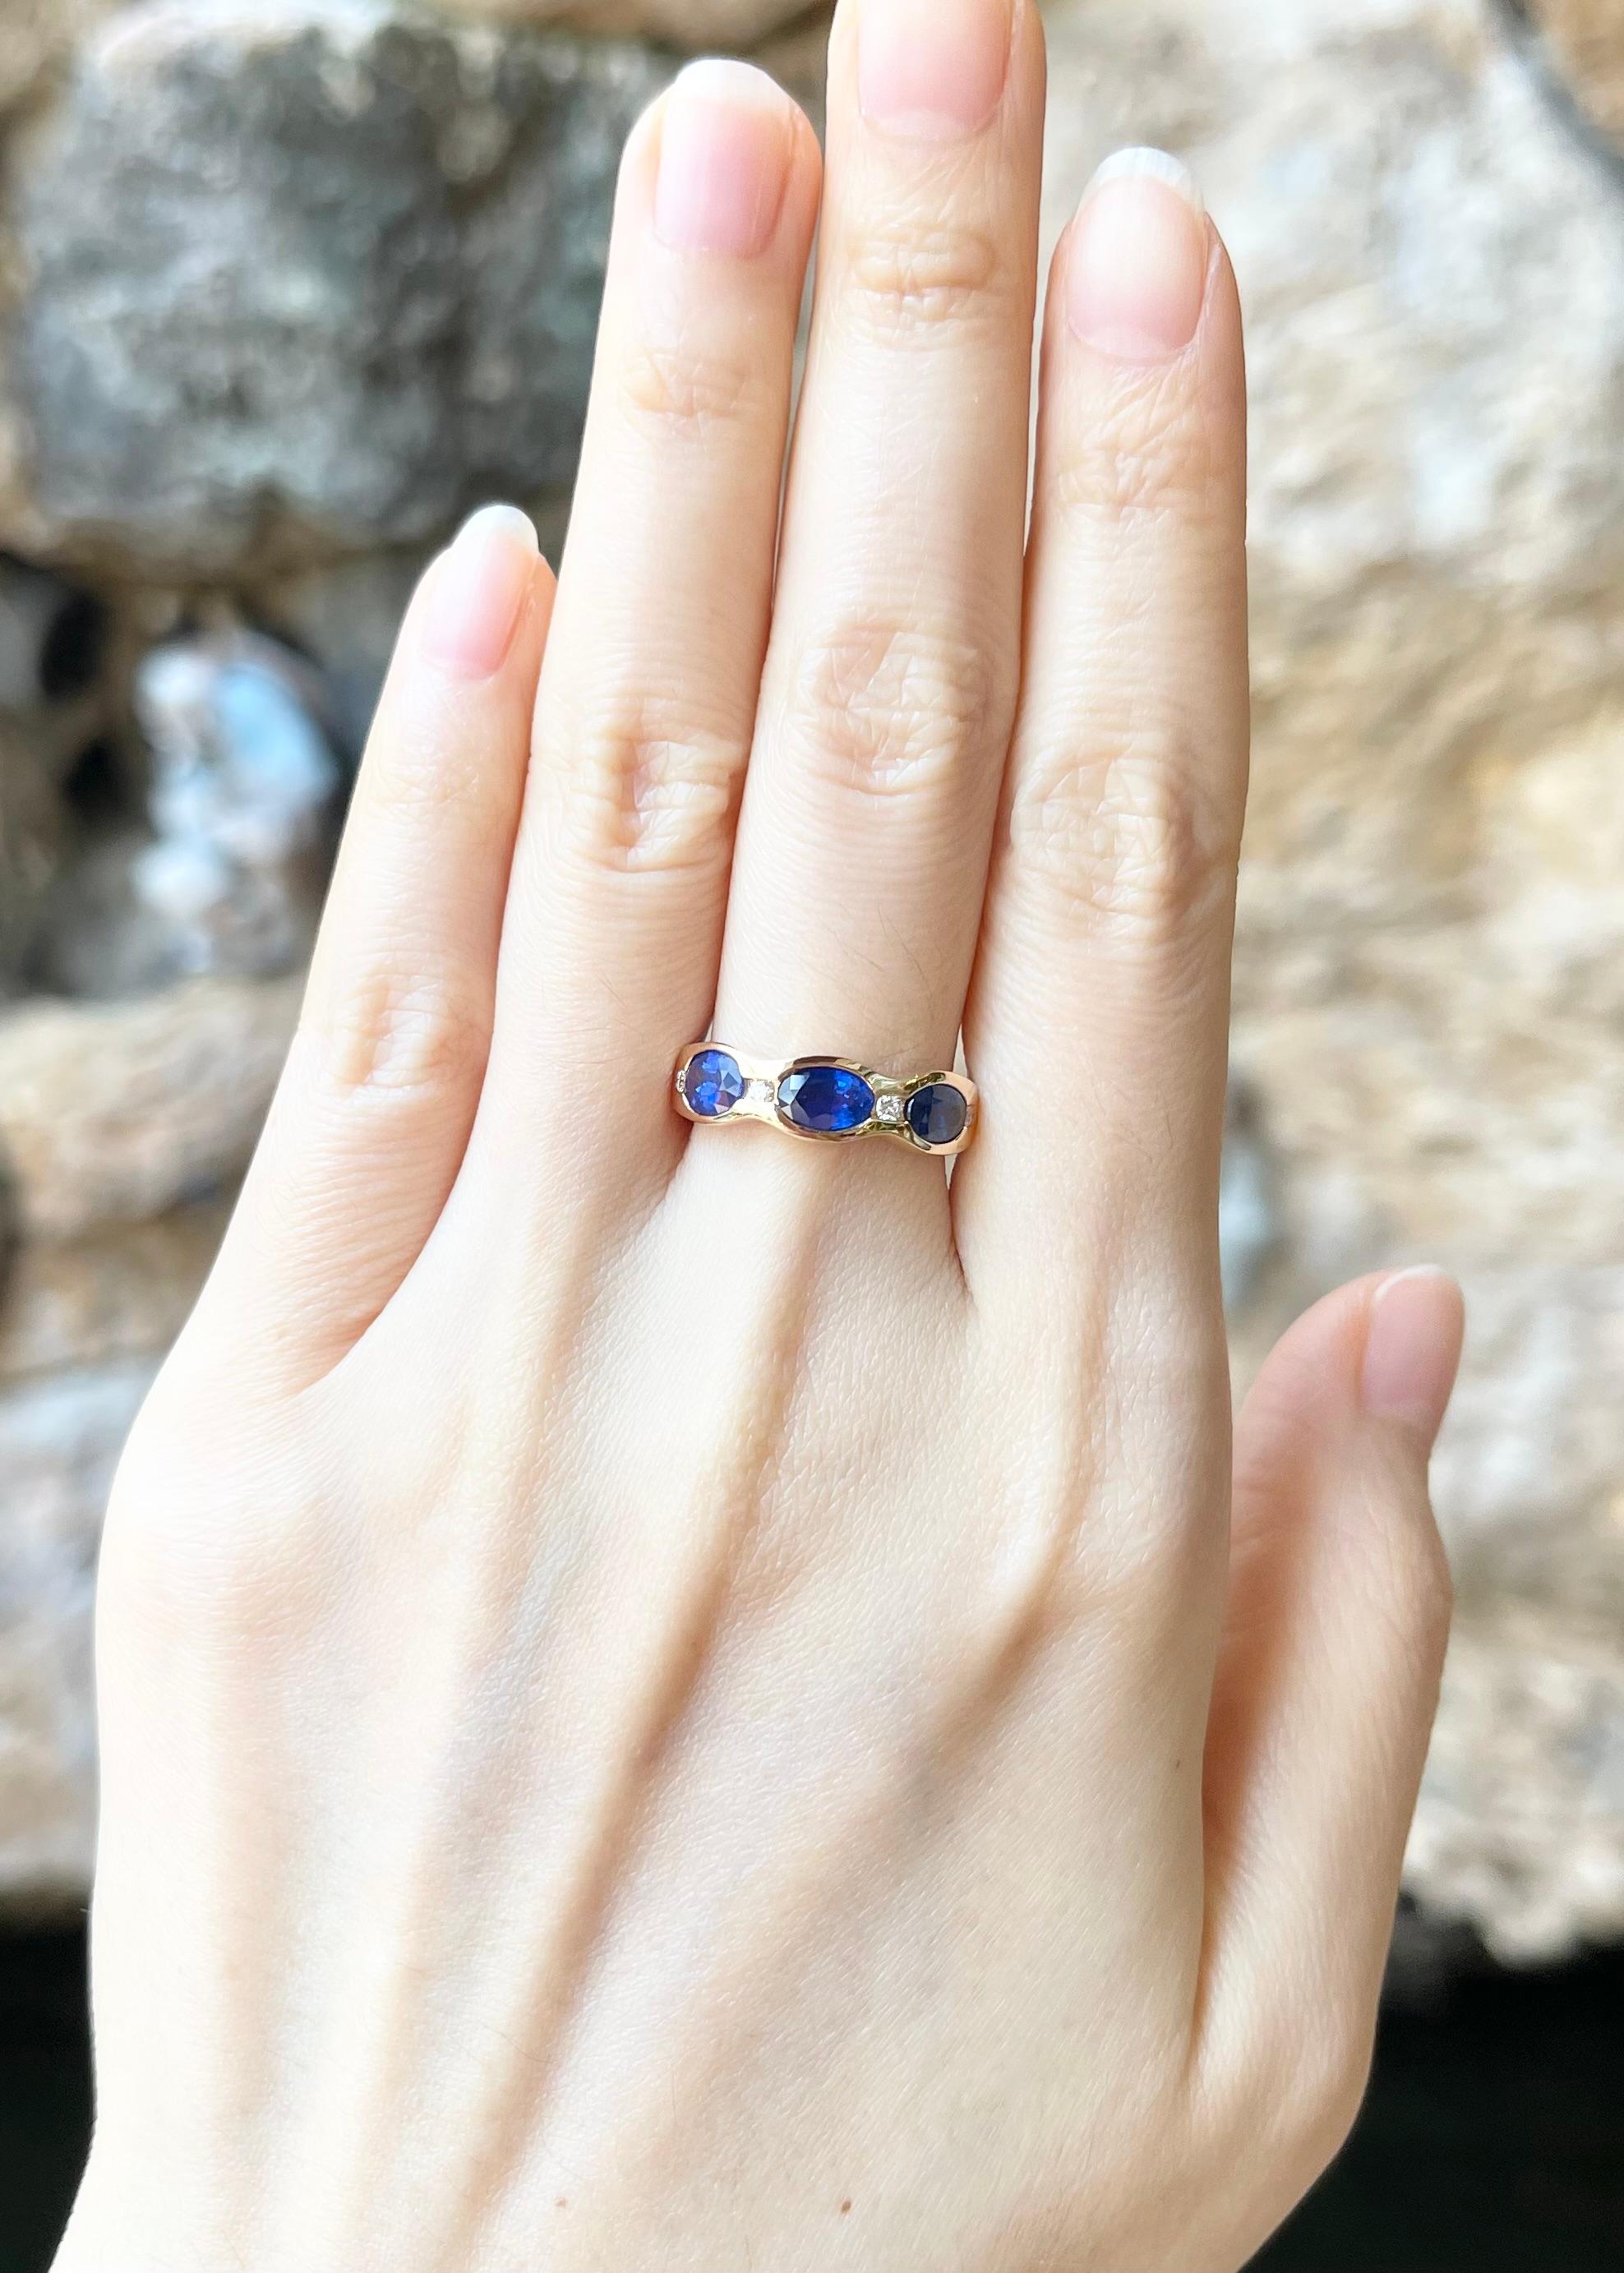 Blue Sapphire 1.60 carats with Diamond 0.07 carat Ring set in 18K Rose Gold Settings

Width:  1.8 cm 
Length: 0.6 cm
Ring Size: 55
Total Weight: 4.30 grams

